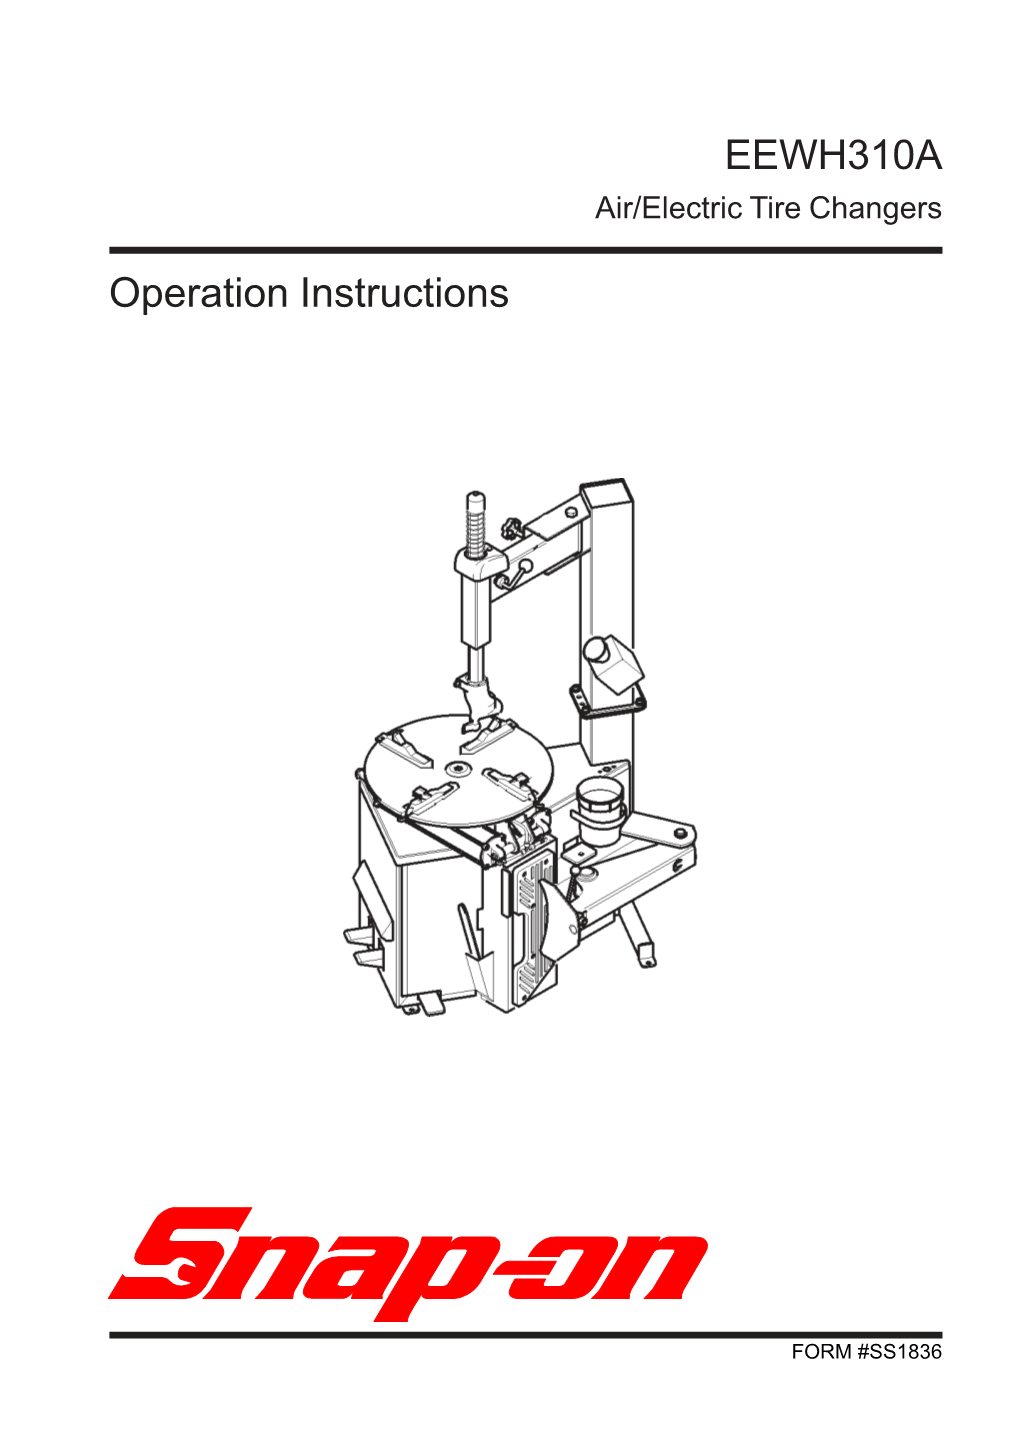 EEWH310A Operation Instructions